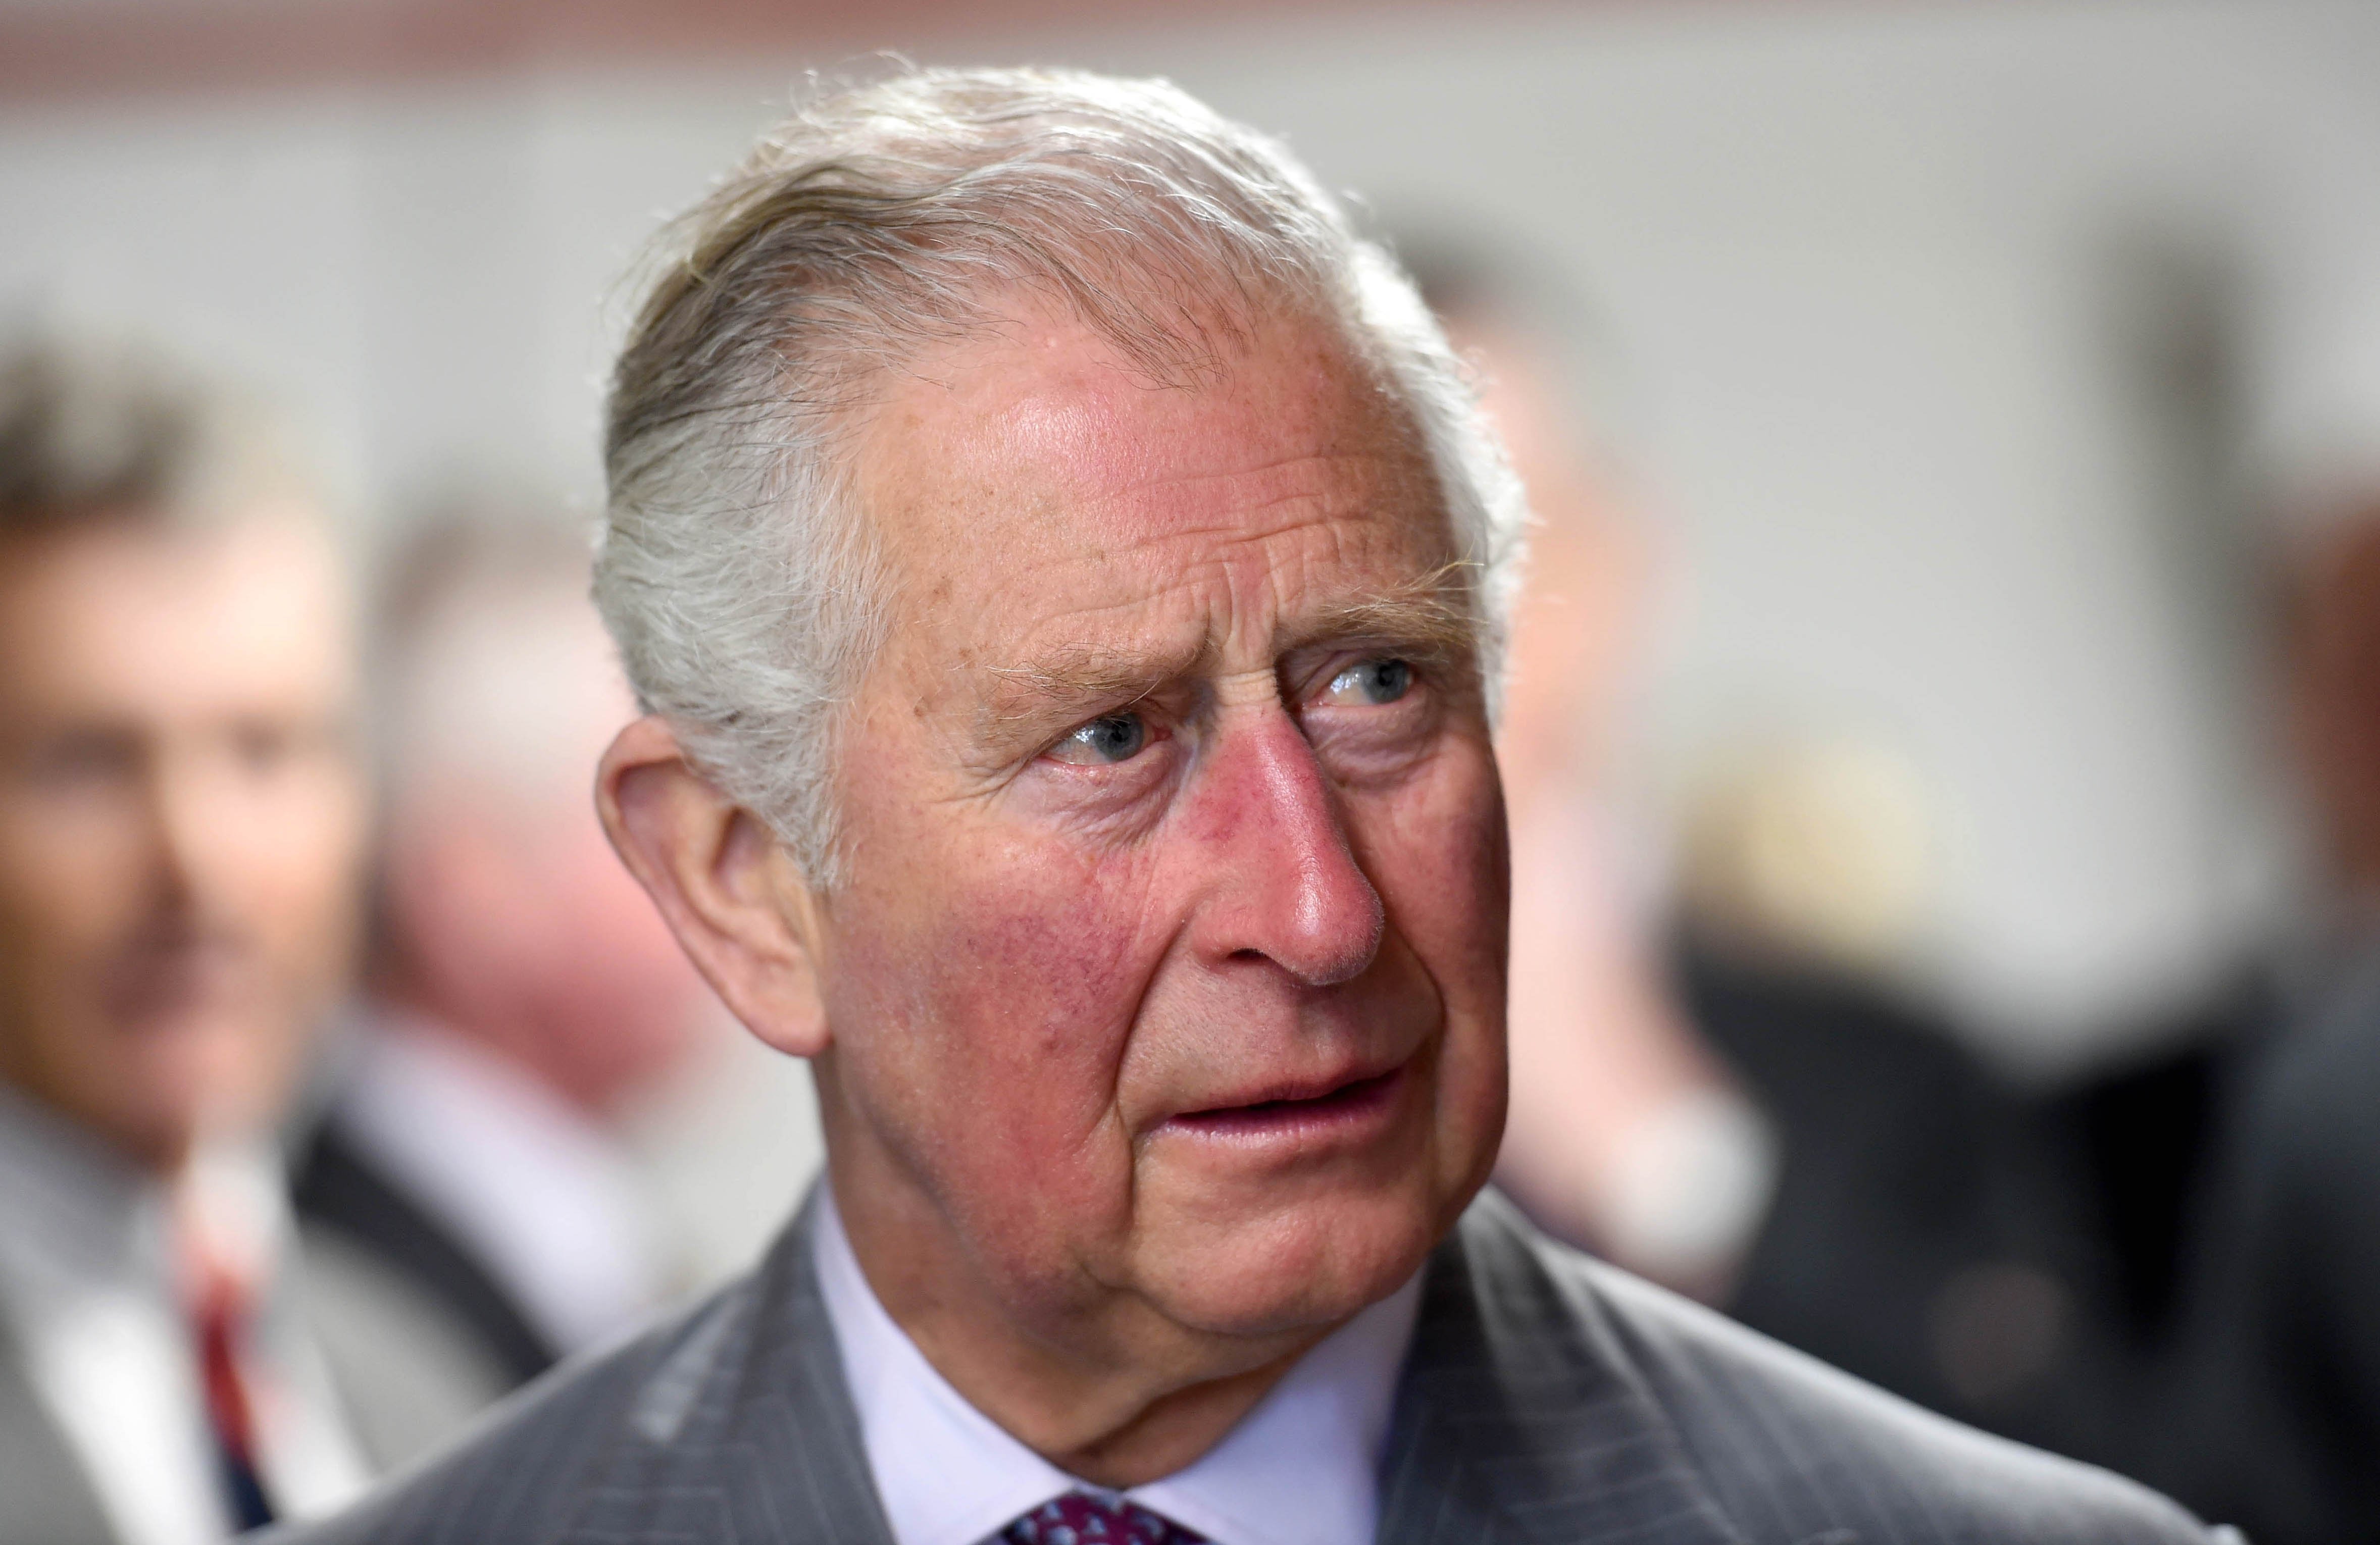 Prince Charles, Prince of Wales makes an official visit to St Austell Brewery on April 05, 2019 in St Austell, England | Photo: Getty Images